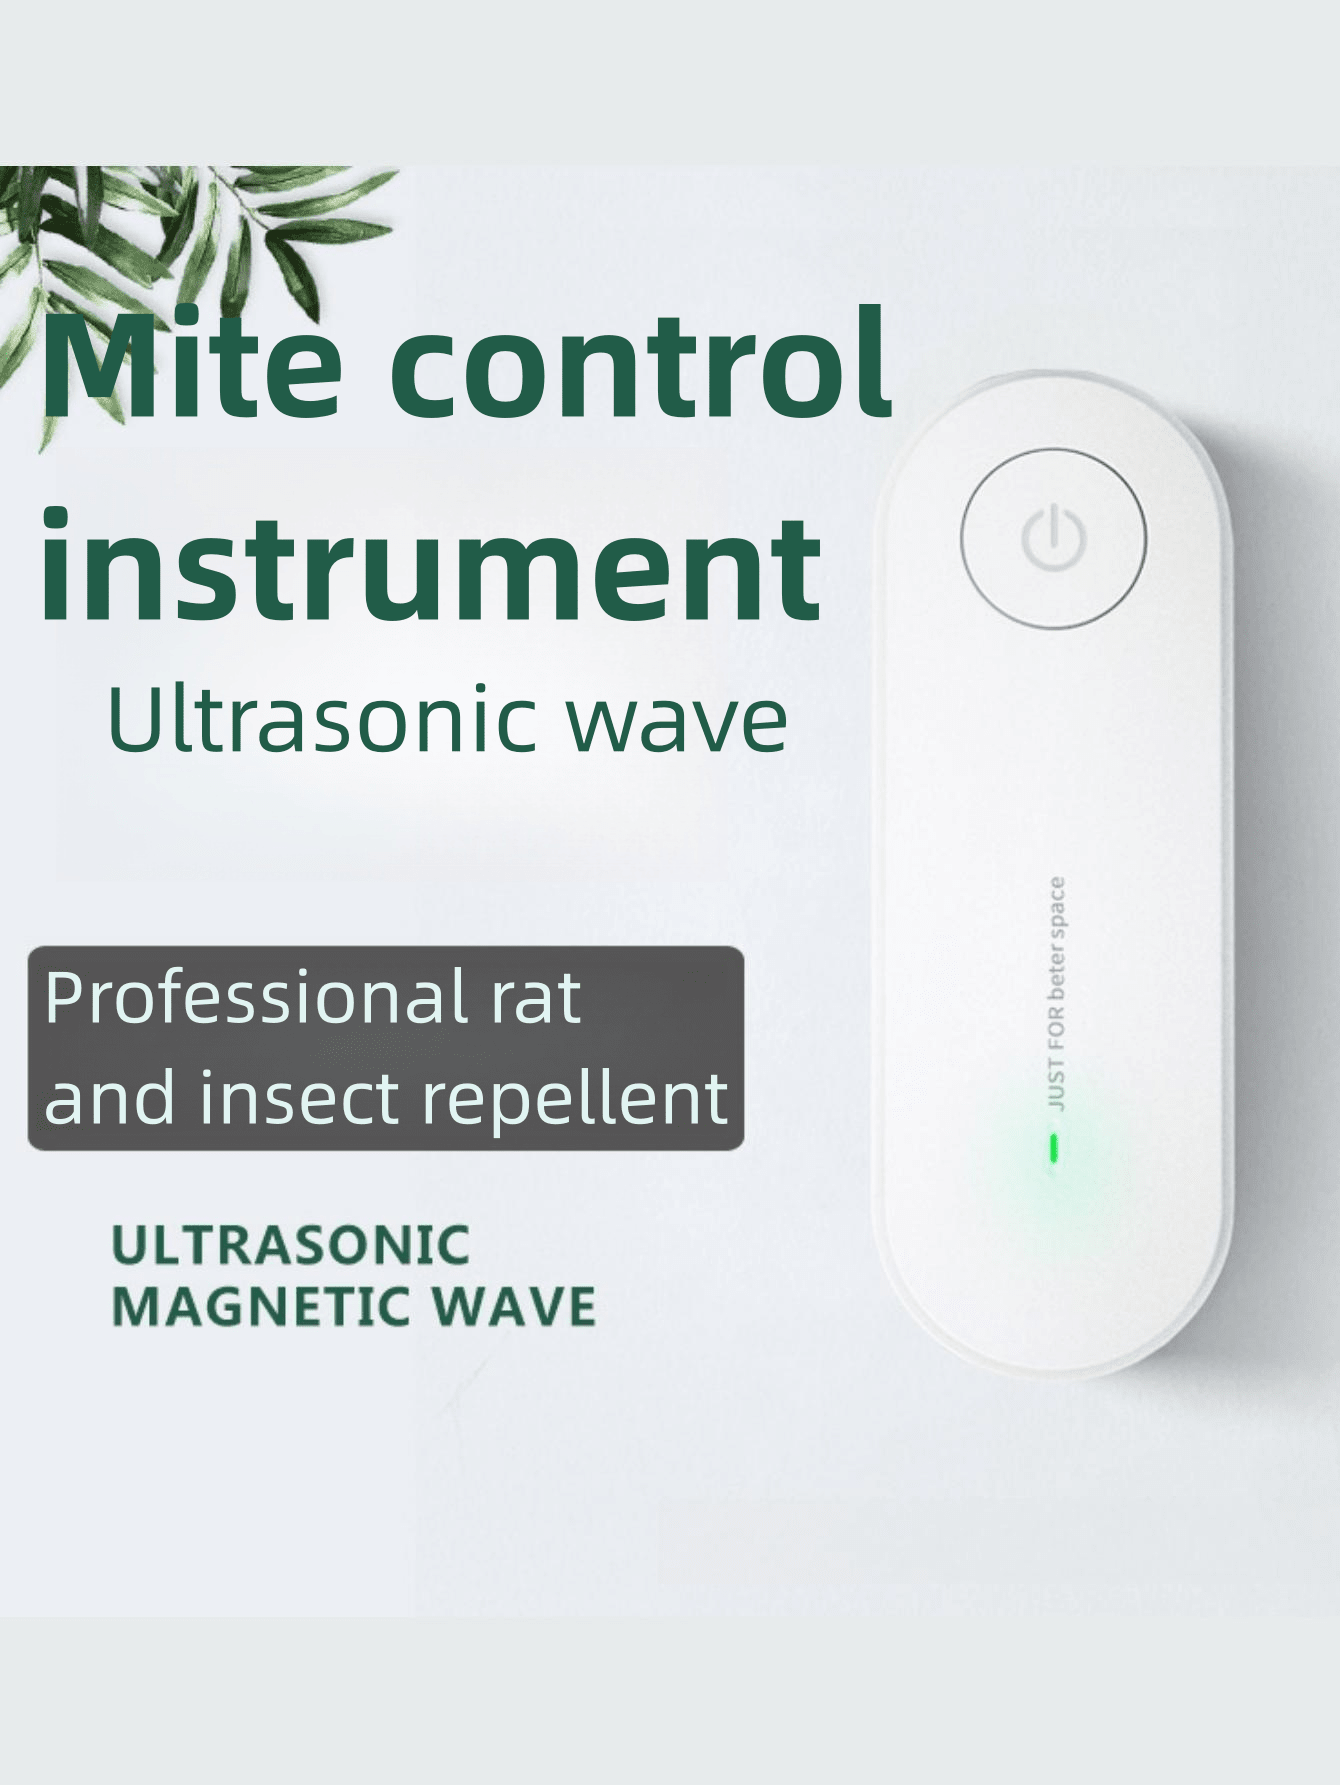 1pc Small Portable Smart Electronic Dust Mite Repellent And Insect Killer, Multi-functional For Dust Mites, Rats, Mosquitoes And Various Crawling Insects, Ideal For Home Living Room And Bedroom-White-1